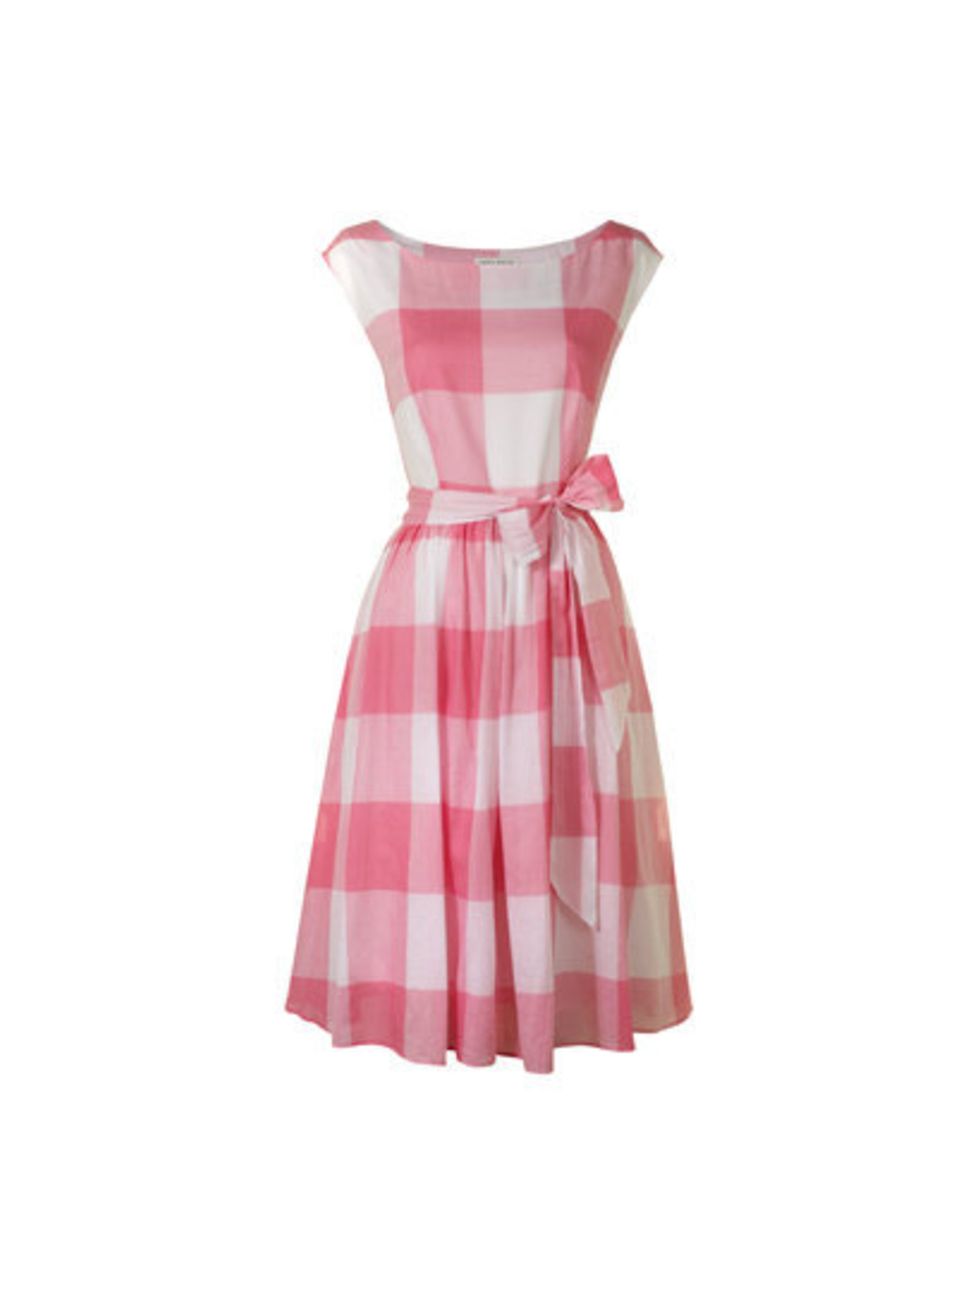 <p>When summer finally arrives, this is what we want to wear.</p><p><a href="http://www.lauraashley.com/page/ftbc2014">Laura Ashley</a> dress, £85</p>